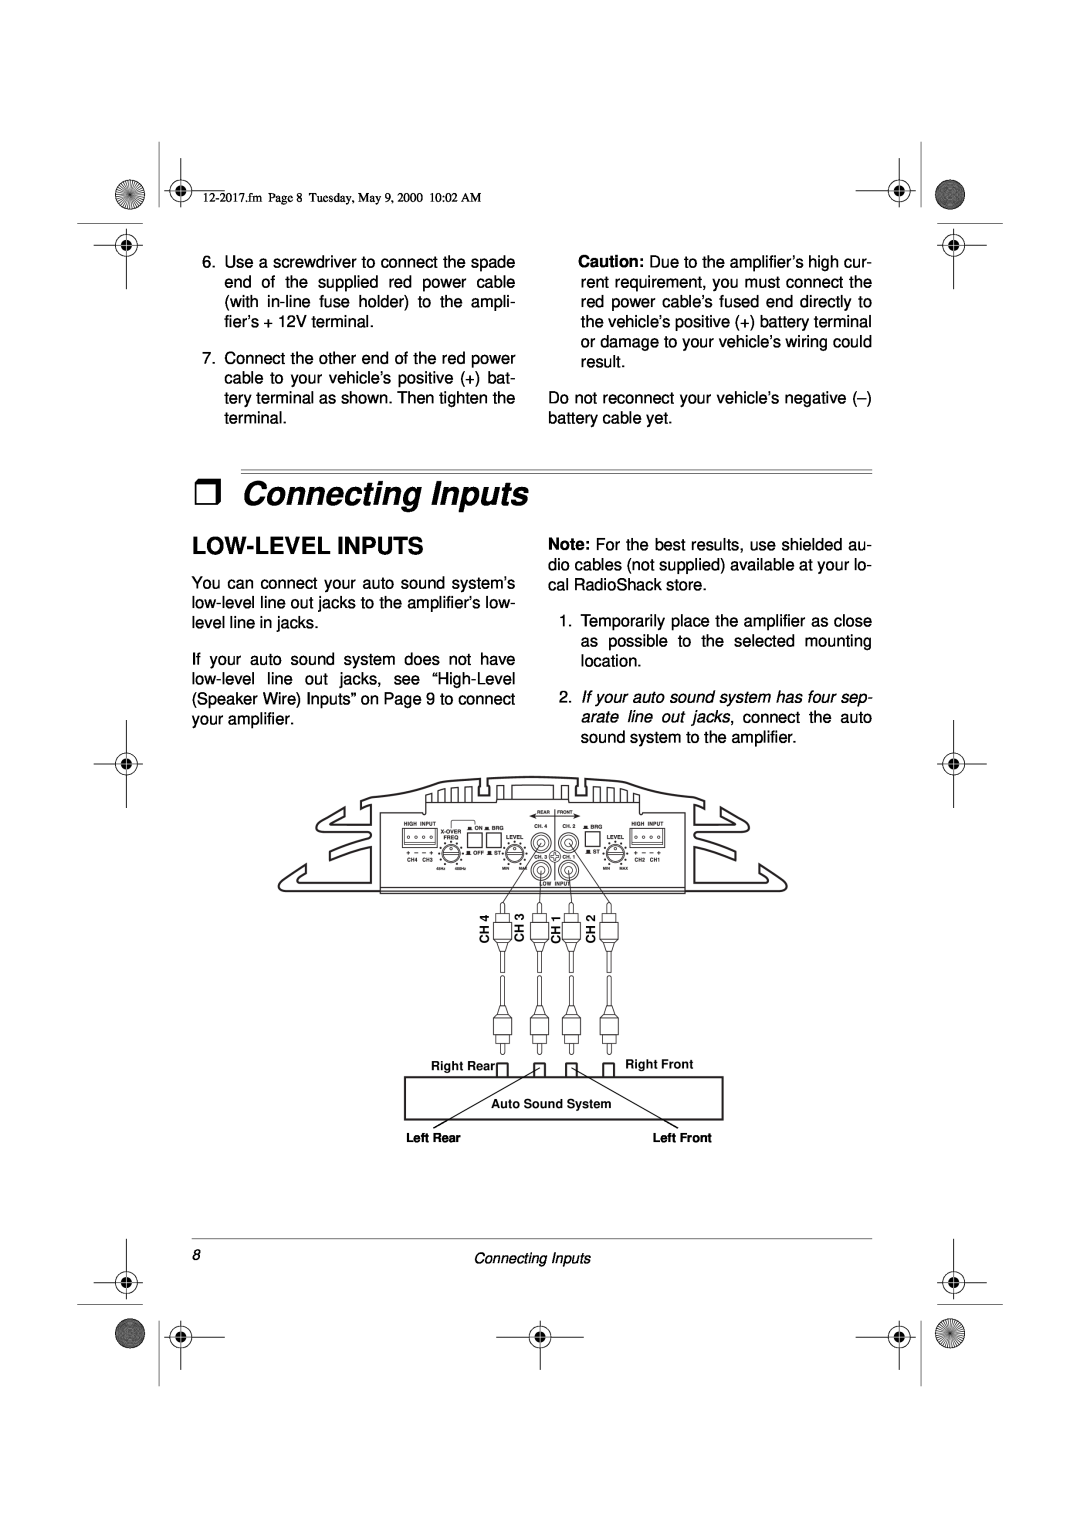 Radio Shack XL-260 owner manual ˆConnecting Inputs, Low-Levelinputs 